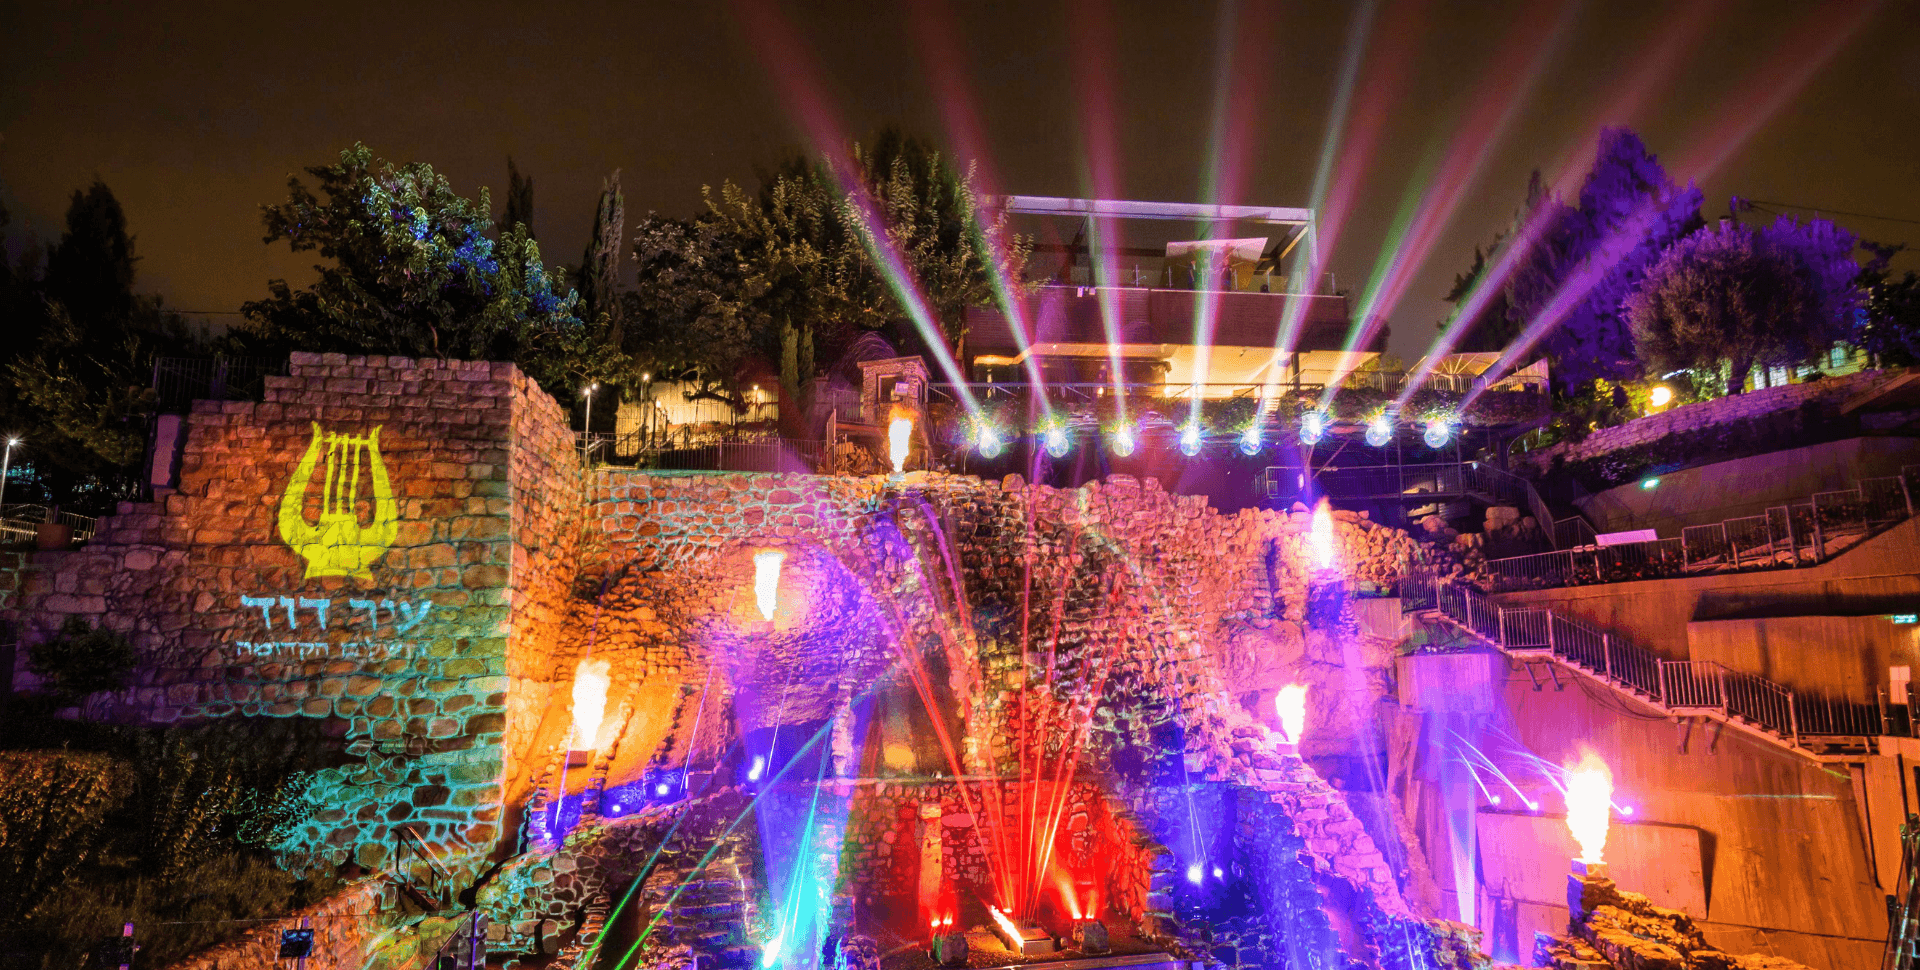 Enjoy the Night Show at the City of David